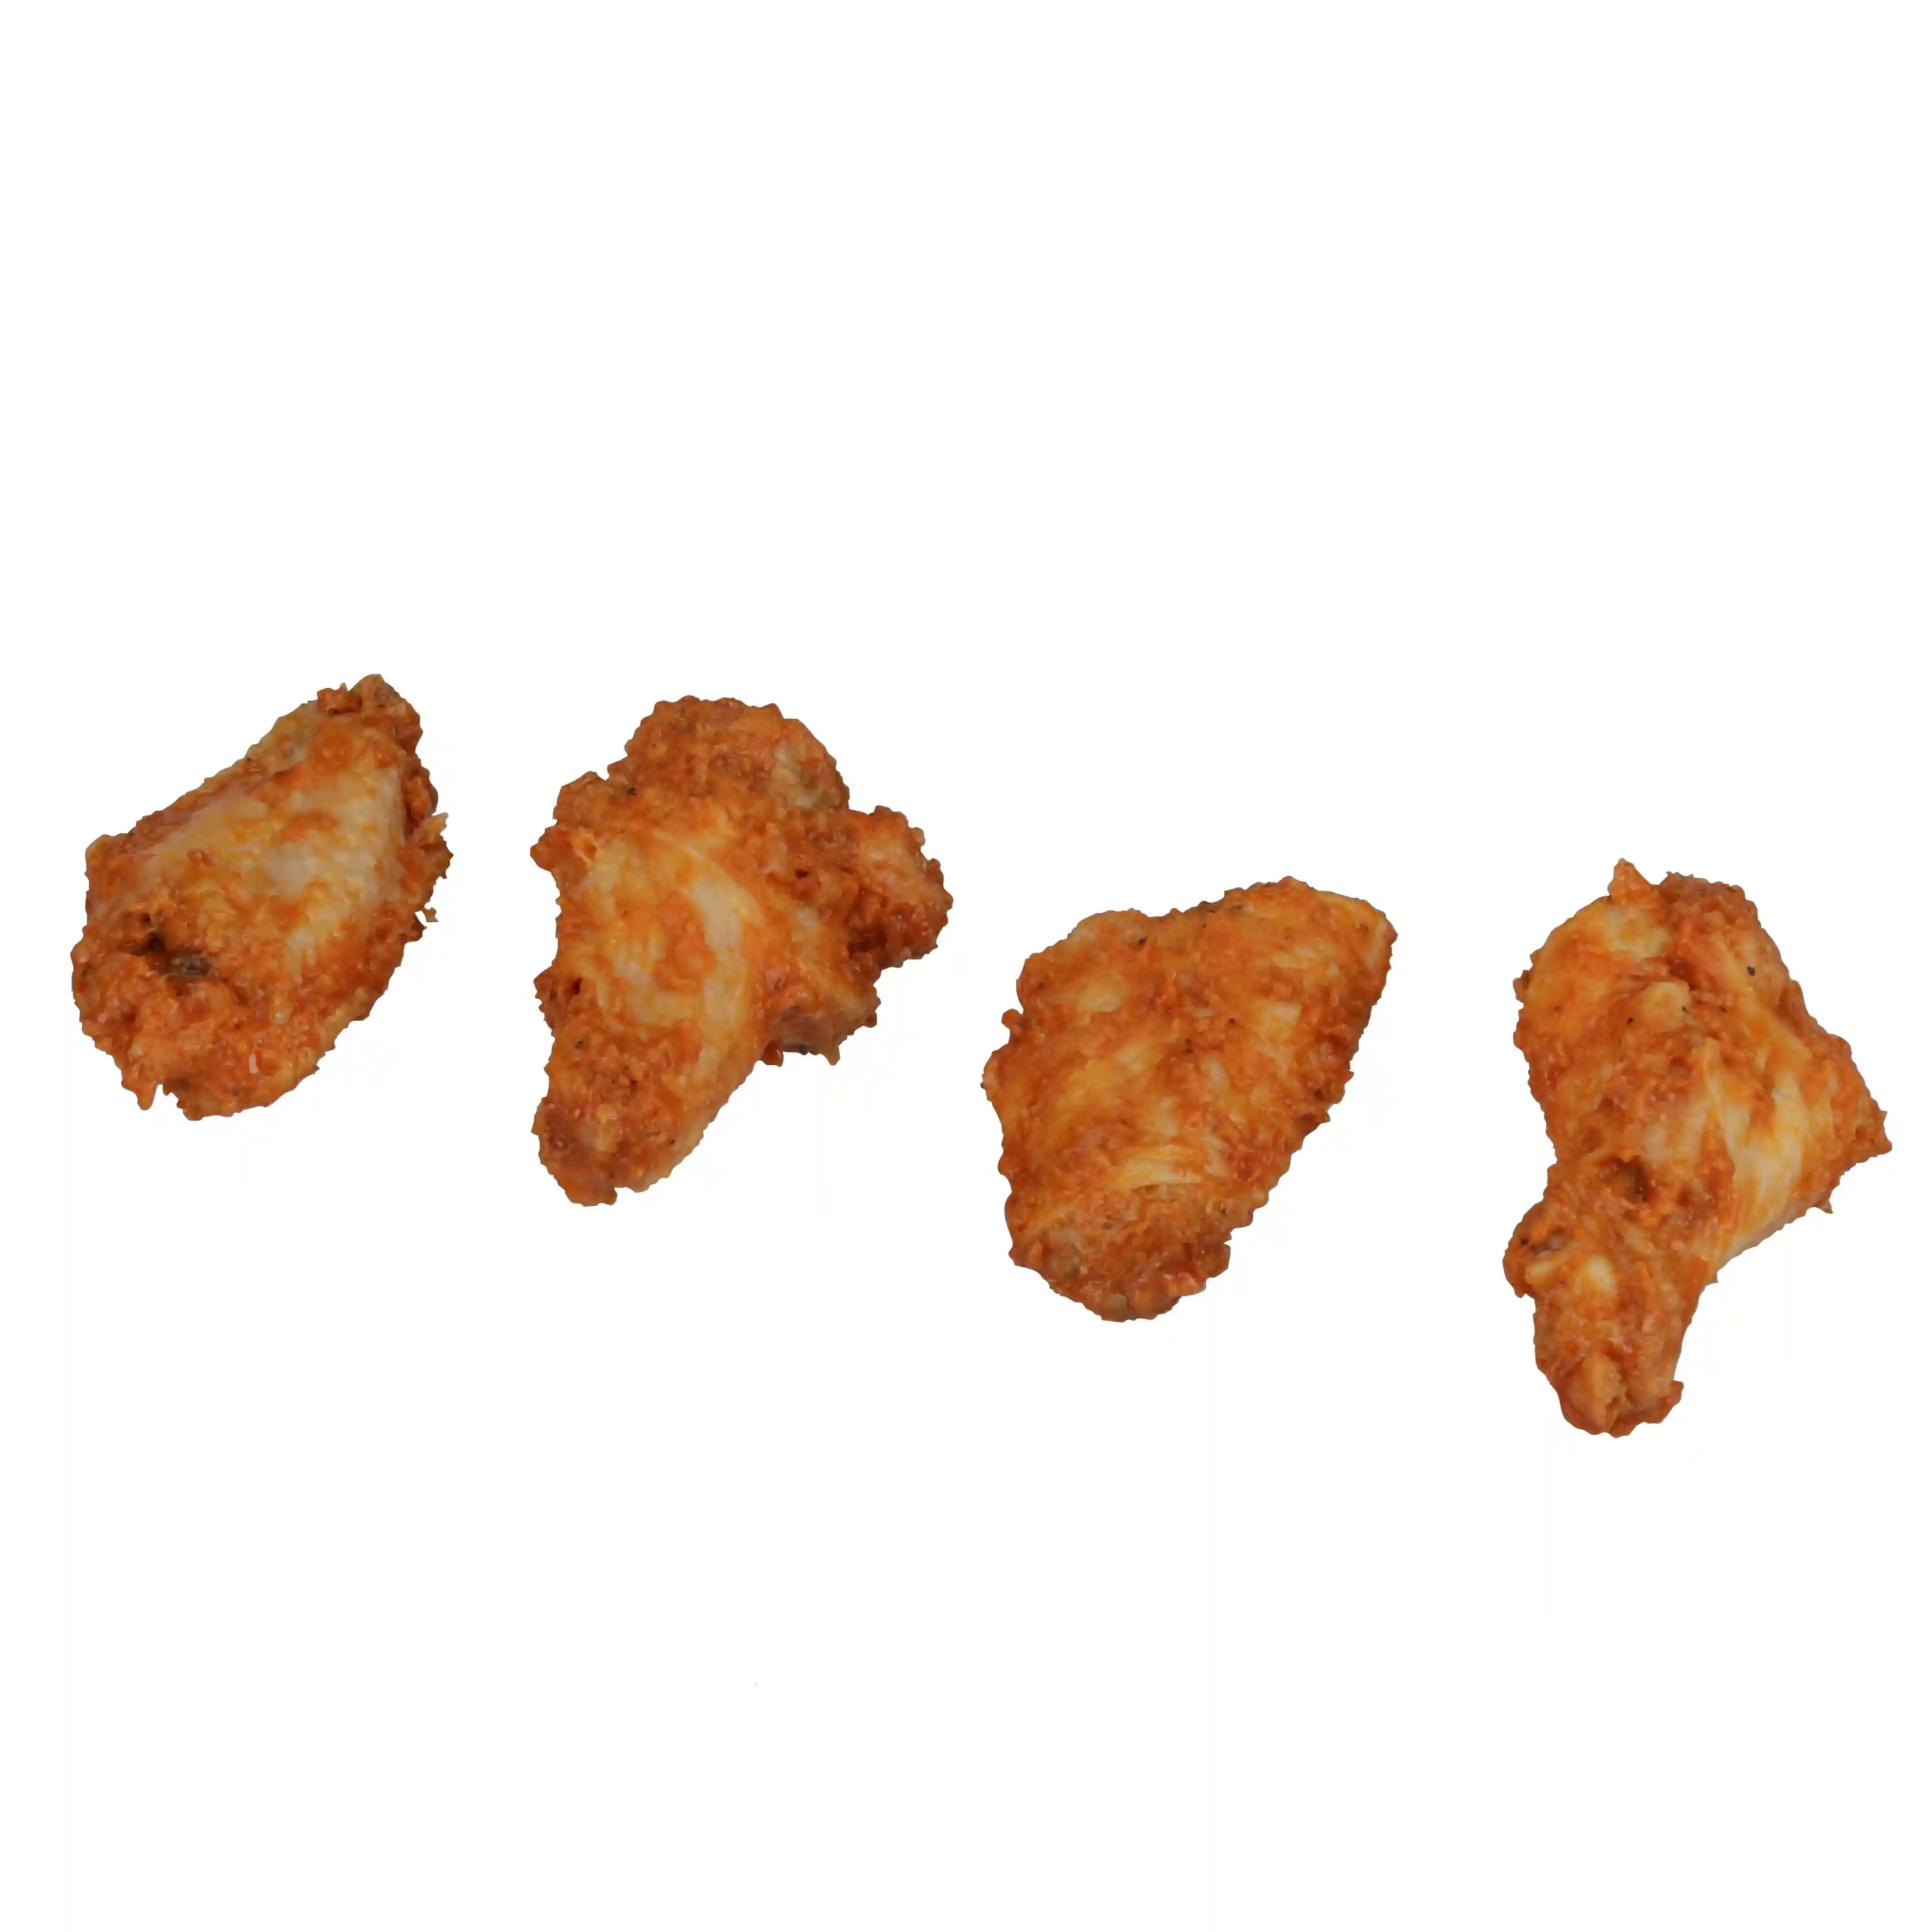 Tyson® Fully Cooked Buffalo Glazed Bone-In Chicken Wing Sections, Largehttps://images.salsify.com/image/upload/s--E6Bp6qm_--/q_25/bvbon6rfwmlavzddu3q7.webp